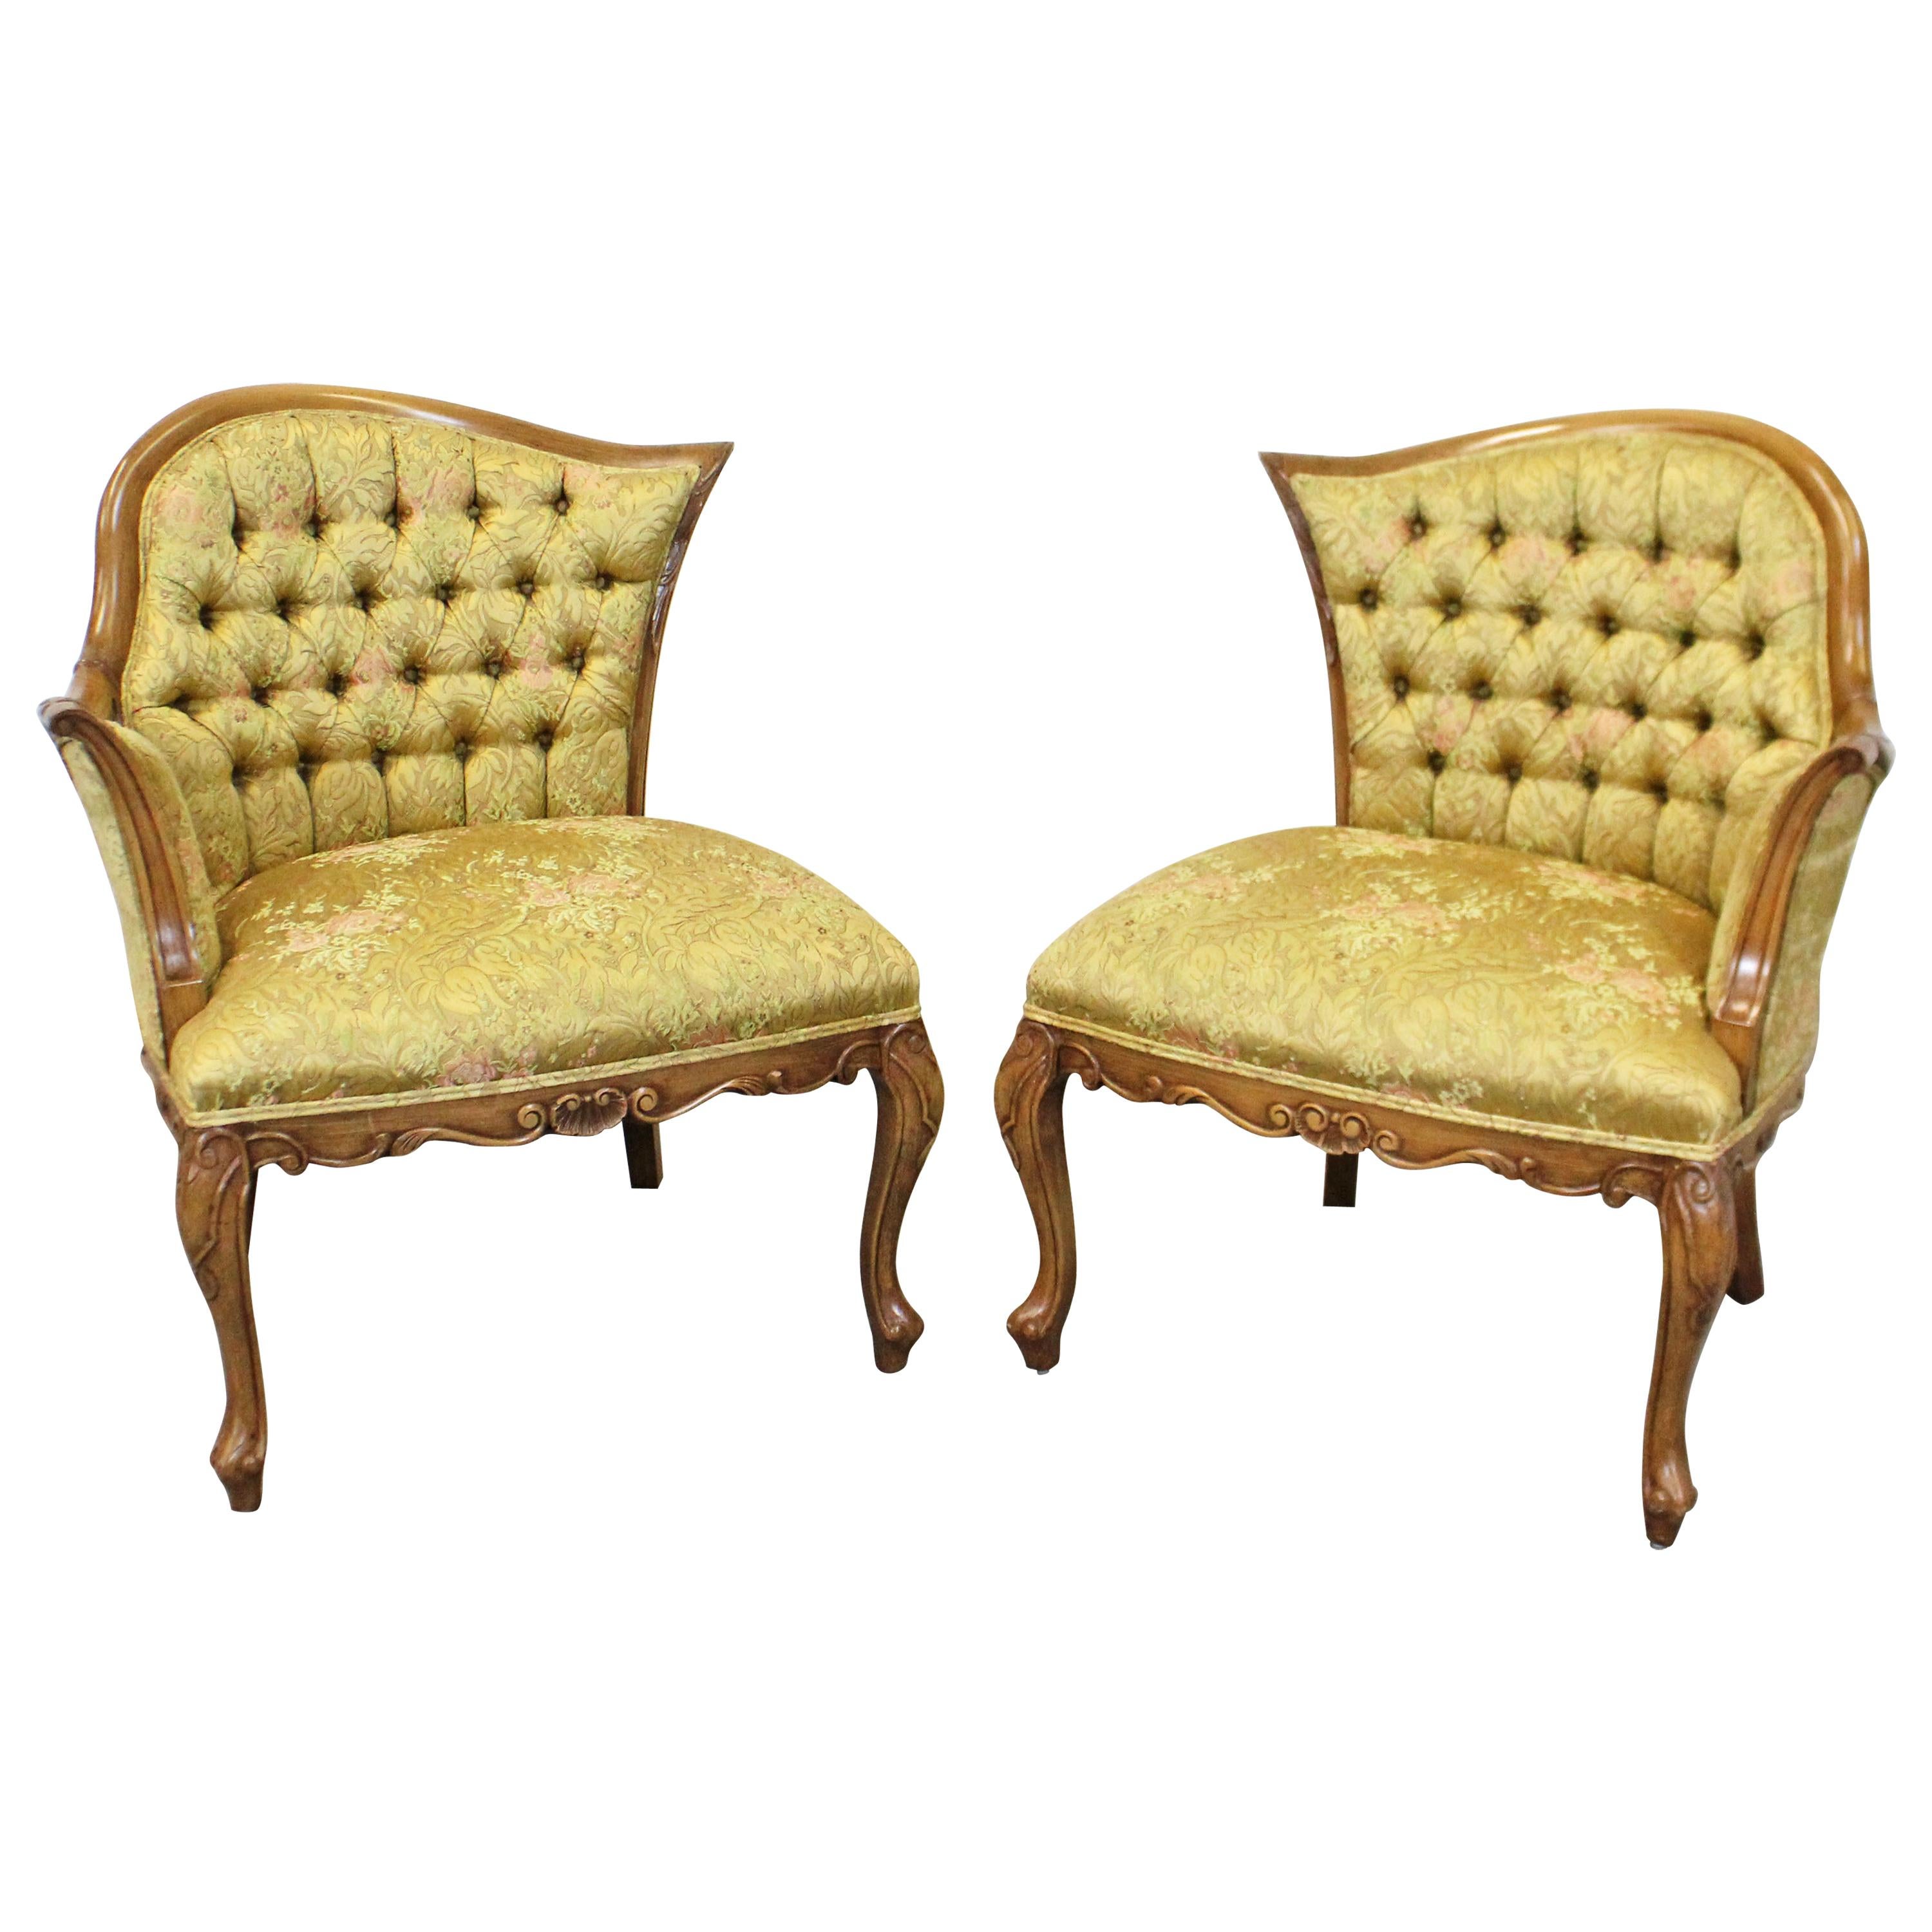 Pair of Vintage French Tufted Fireside Ladies Parlor Chairs